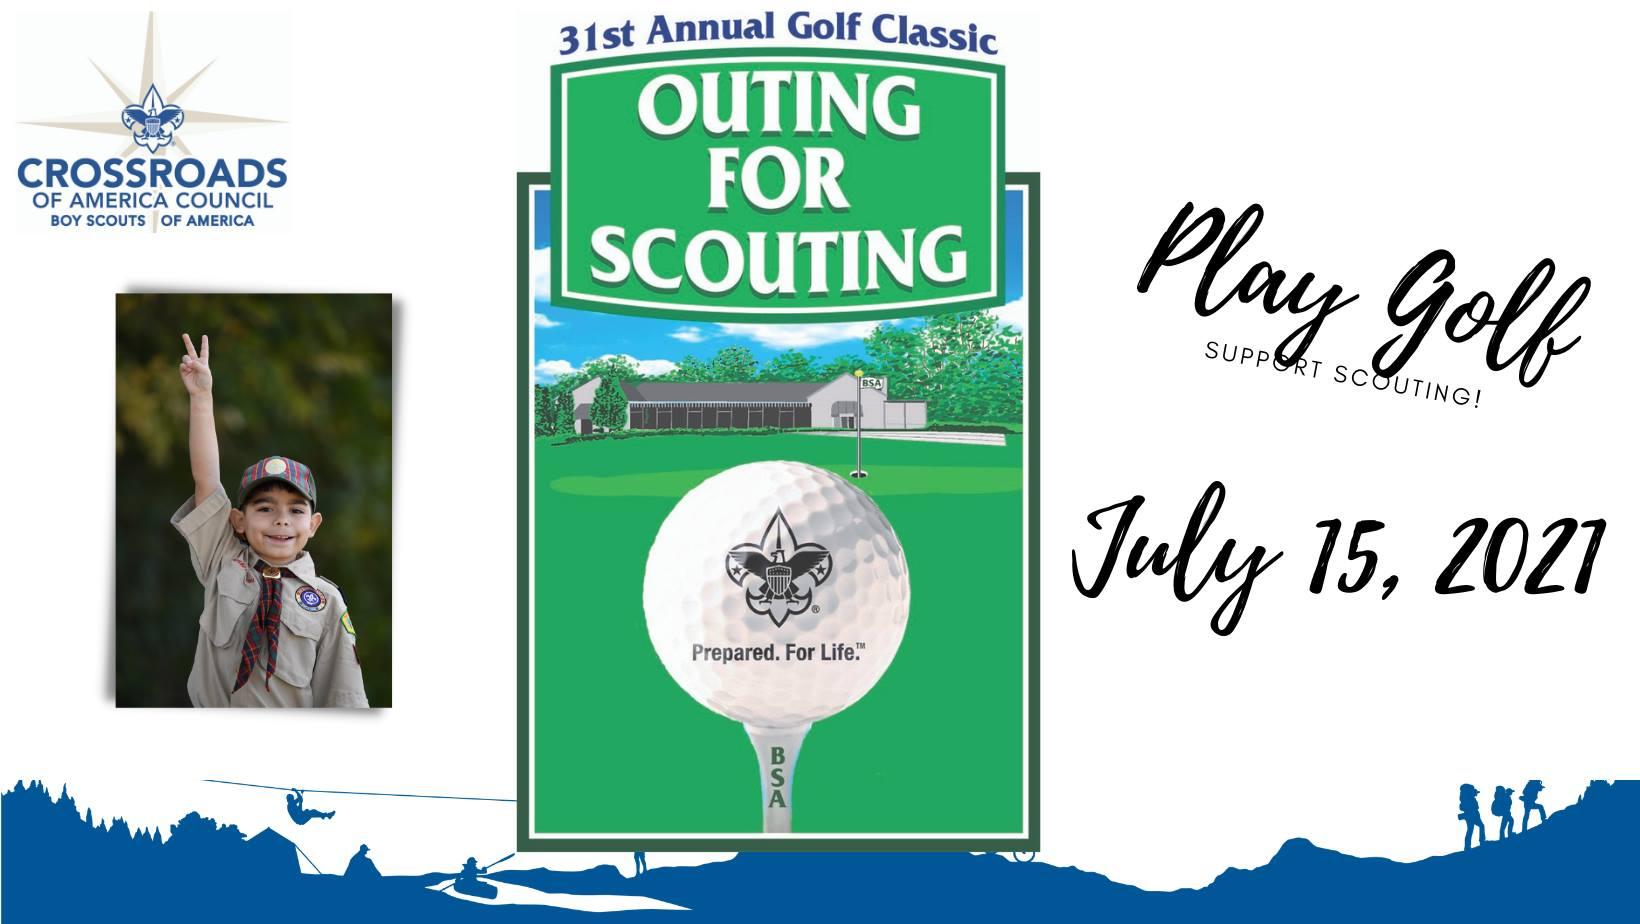 31st Annual Golf Classic - Outing for Scouting